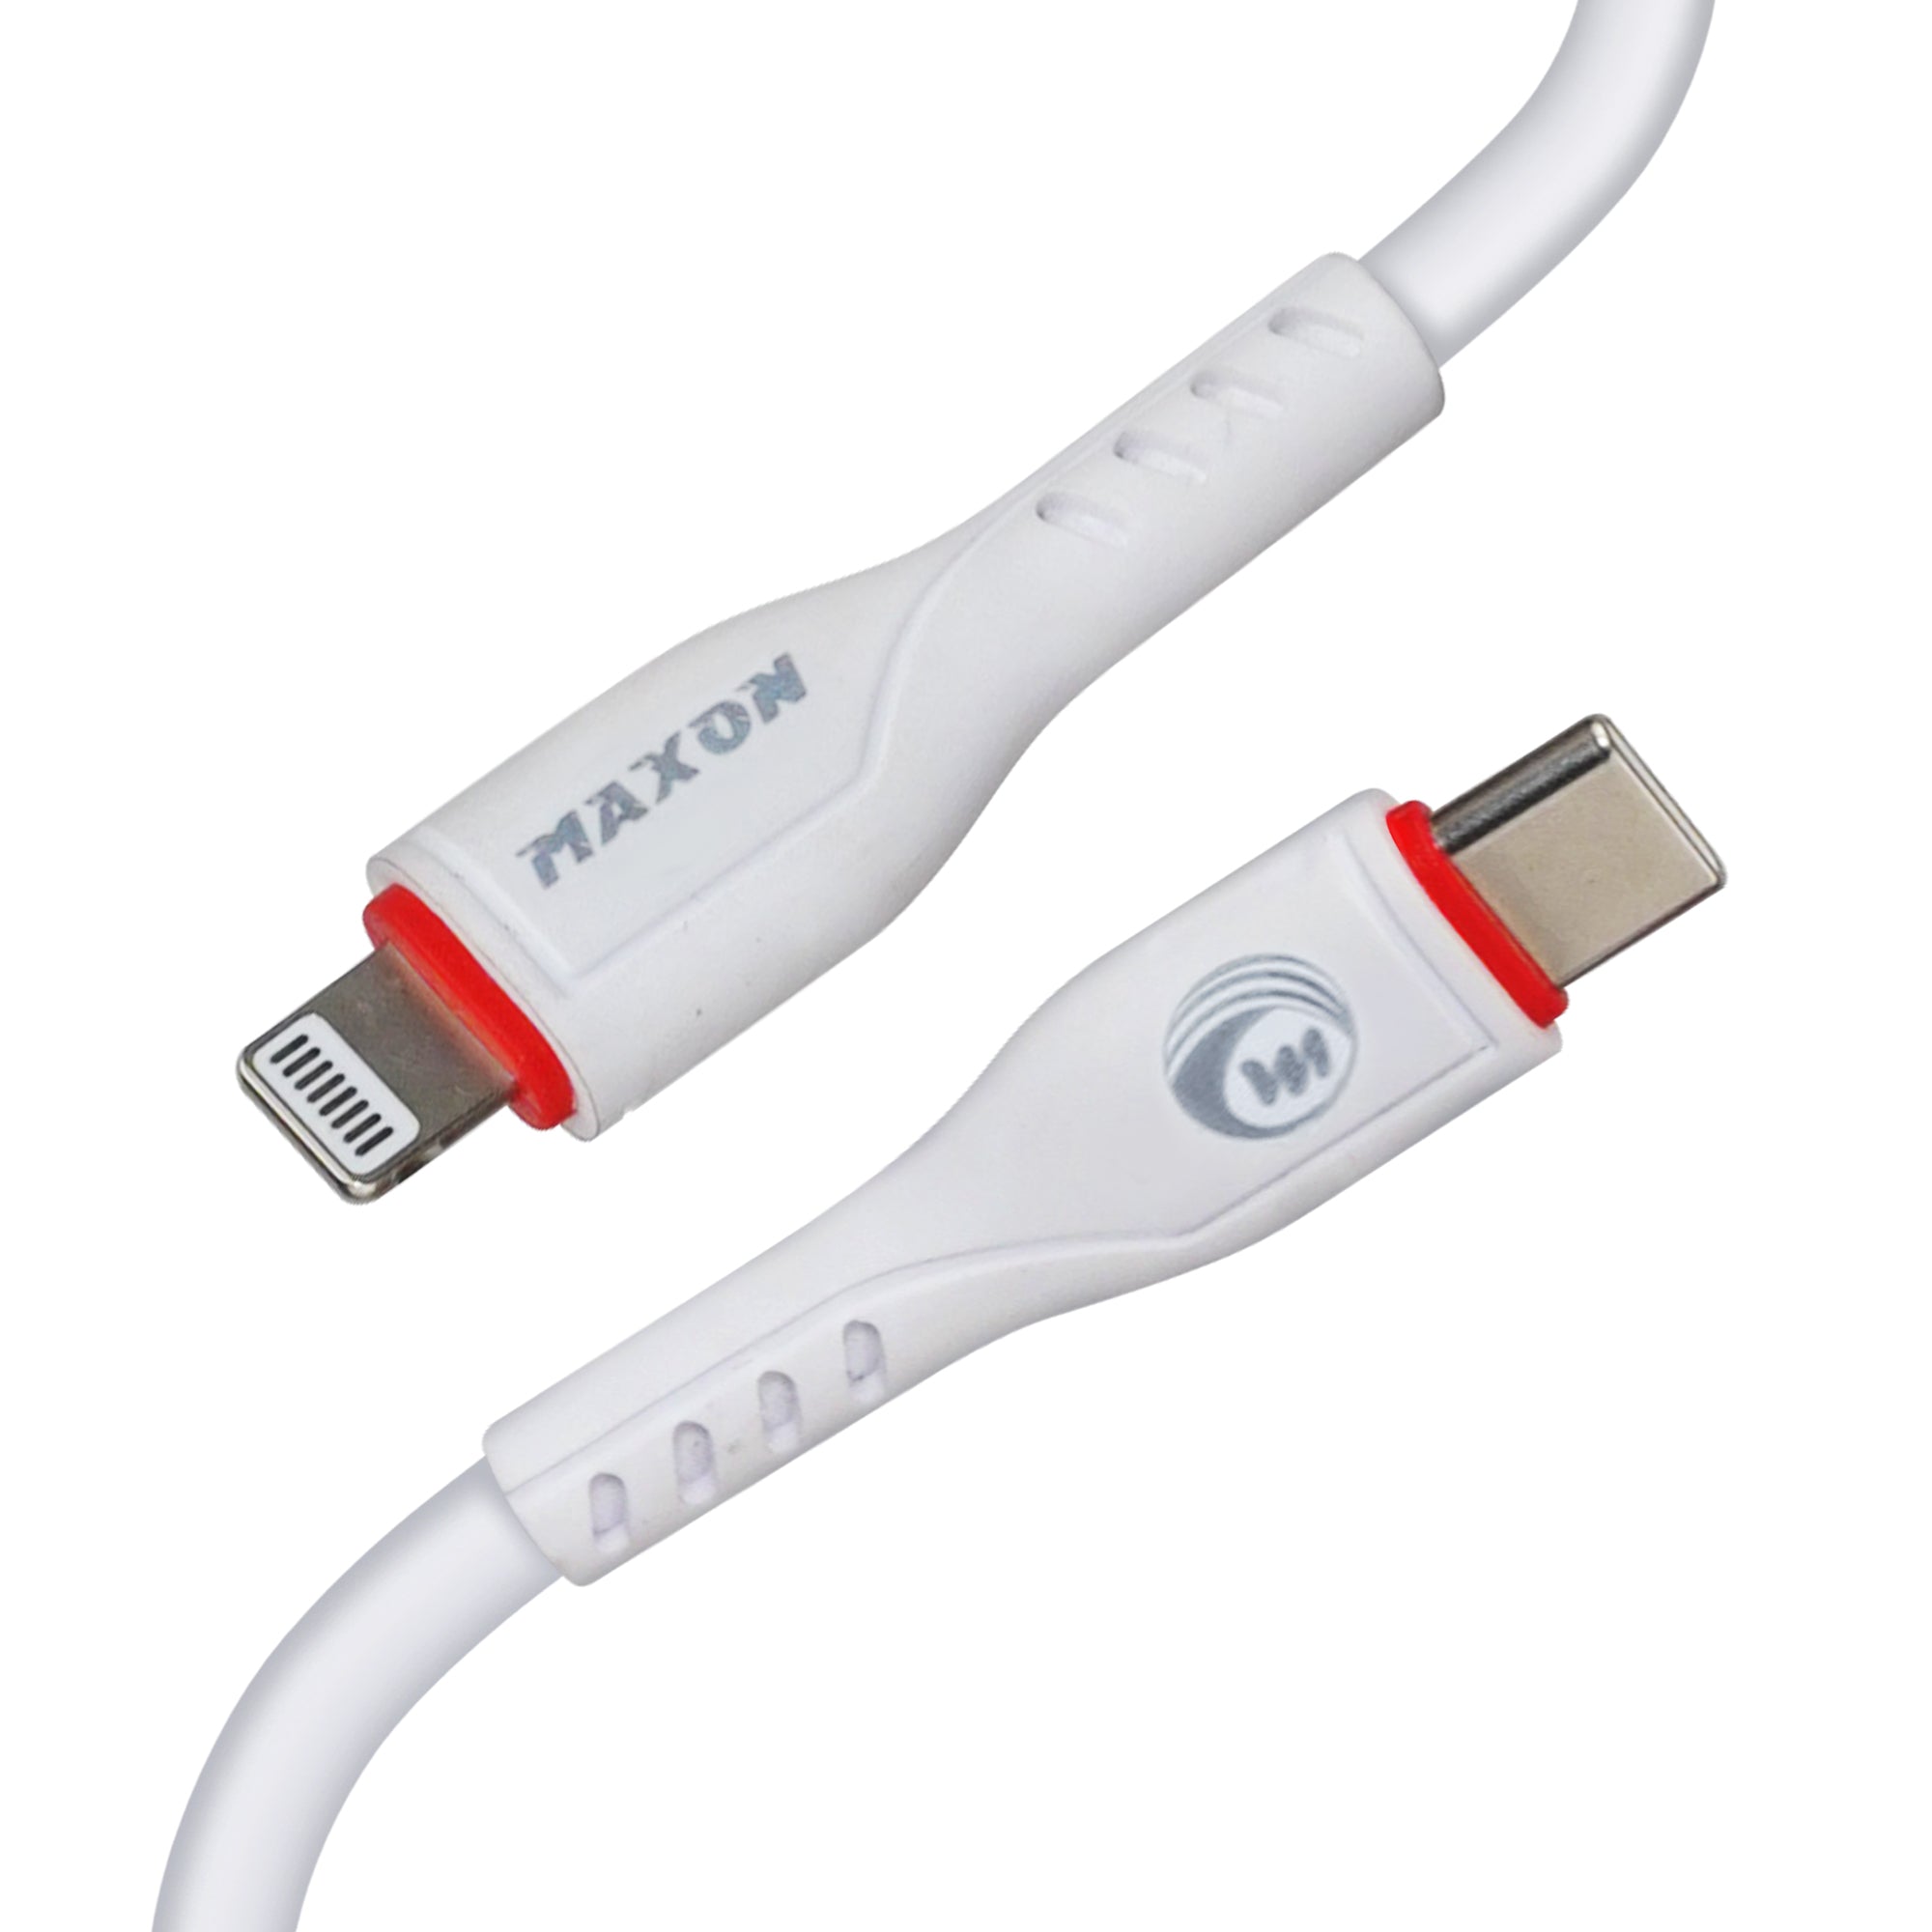 Maxon P-6i Data Cable Type C To IOS Cable